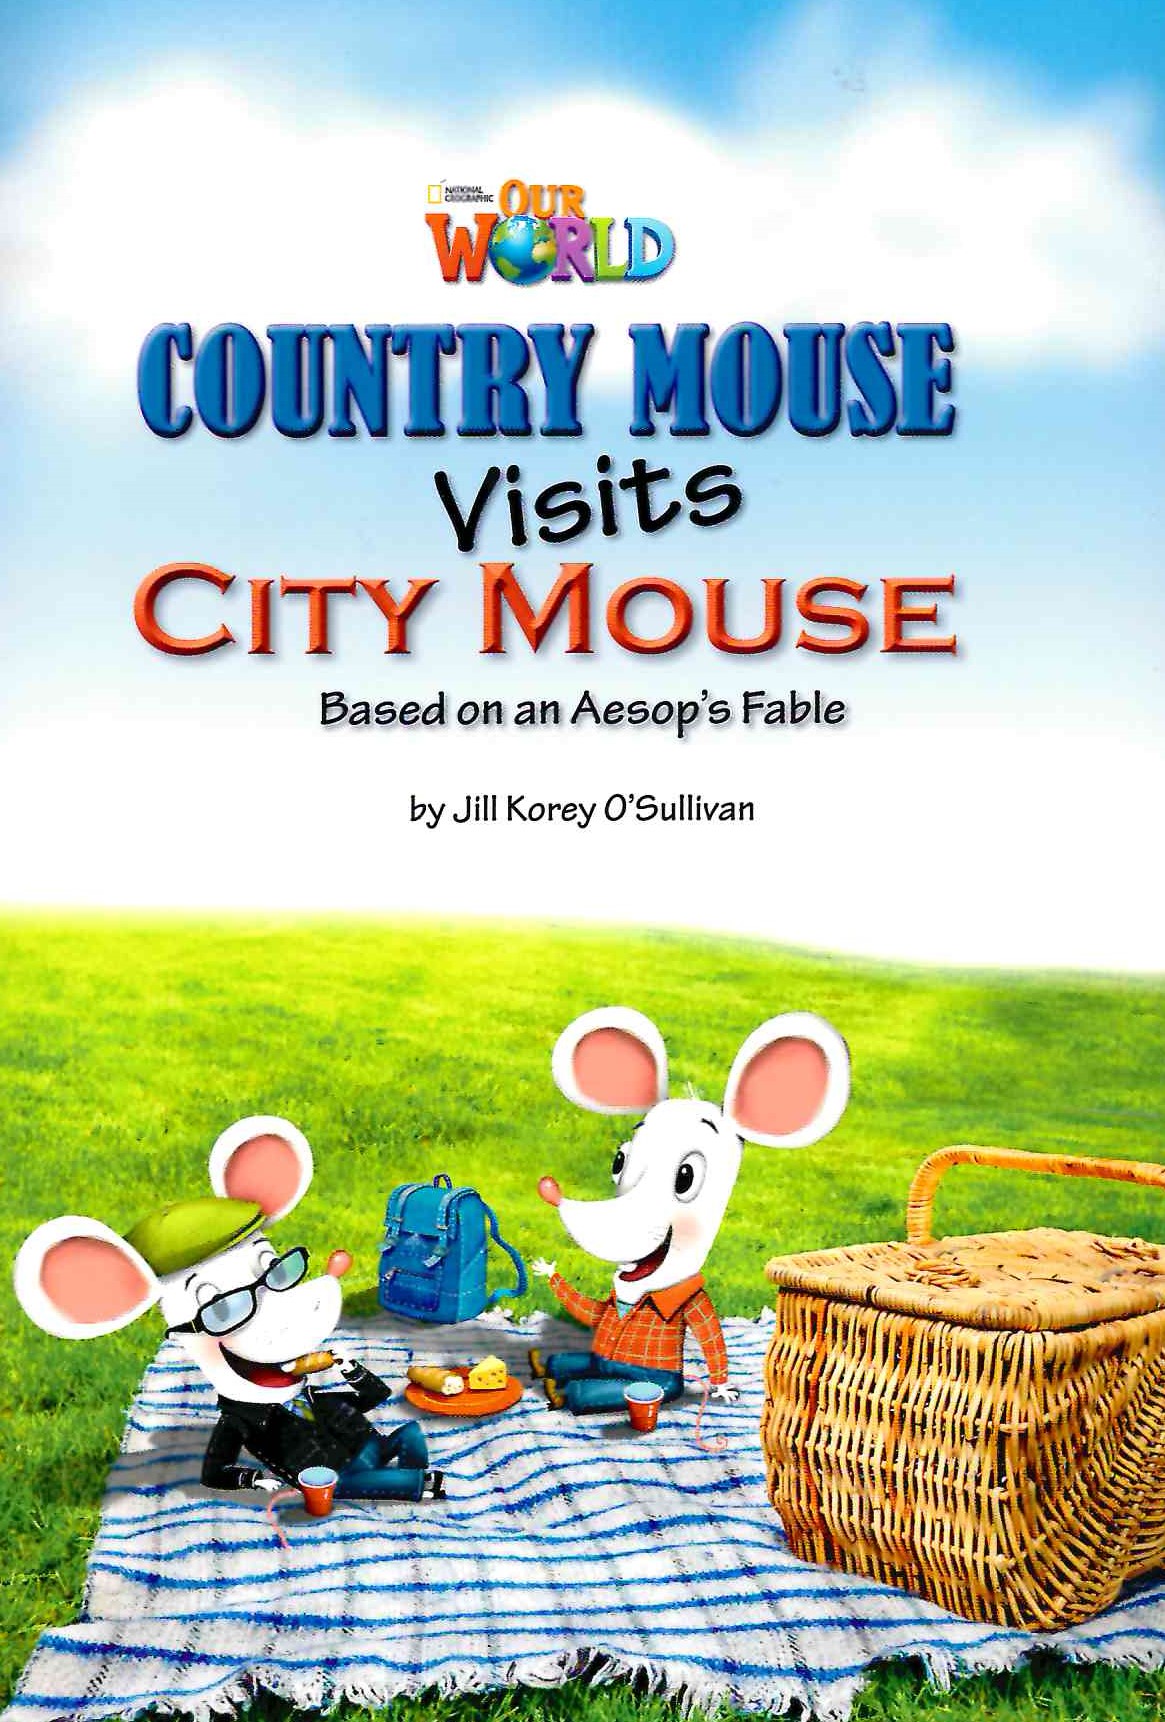 Our World 3 Country Mouse Visits City Mouse / Книга для чтения